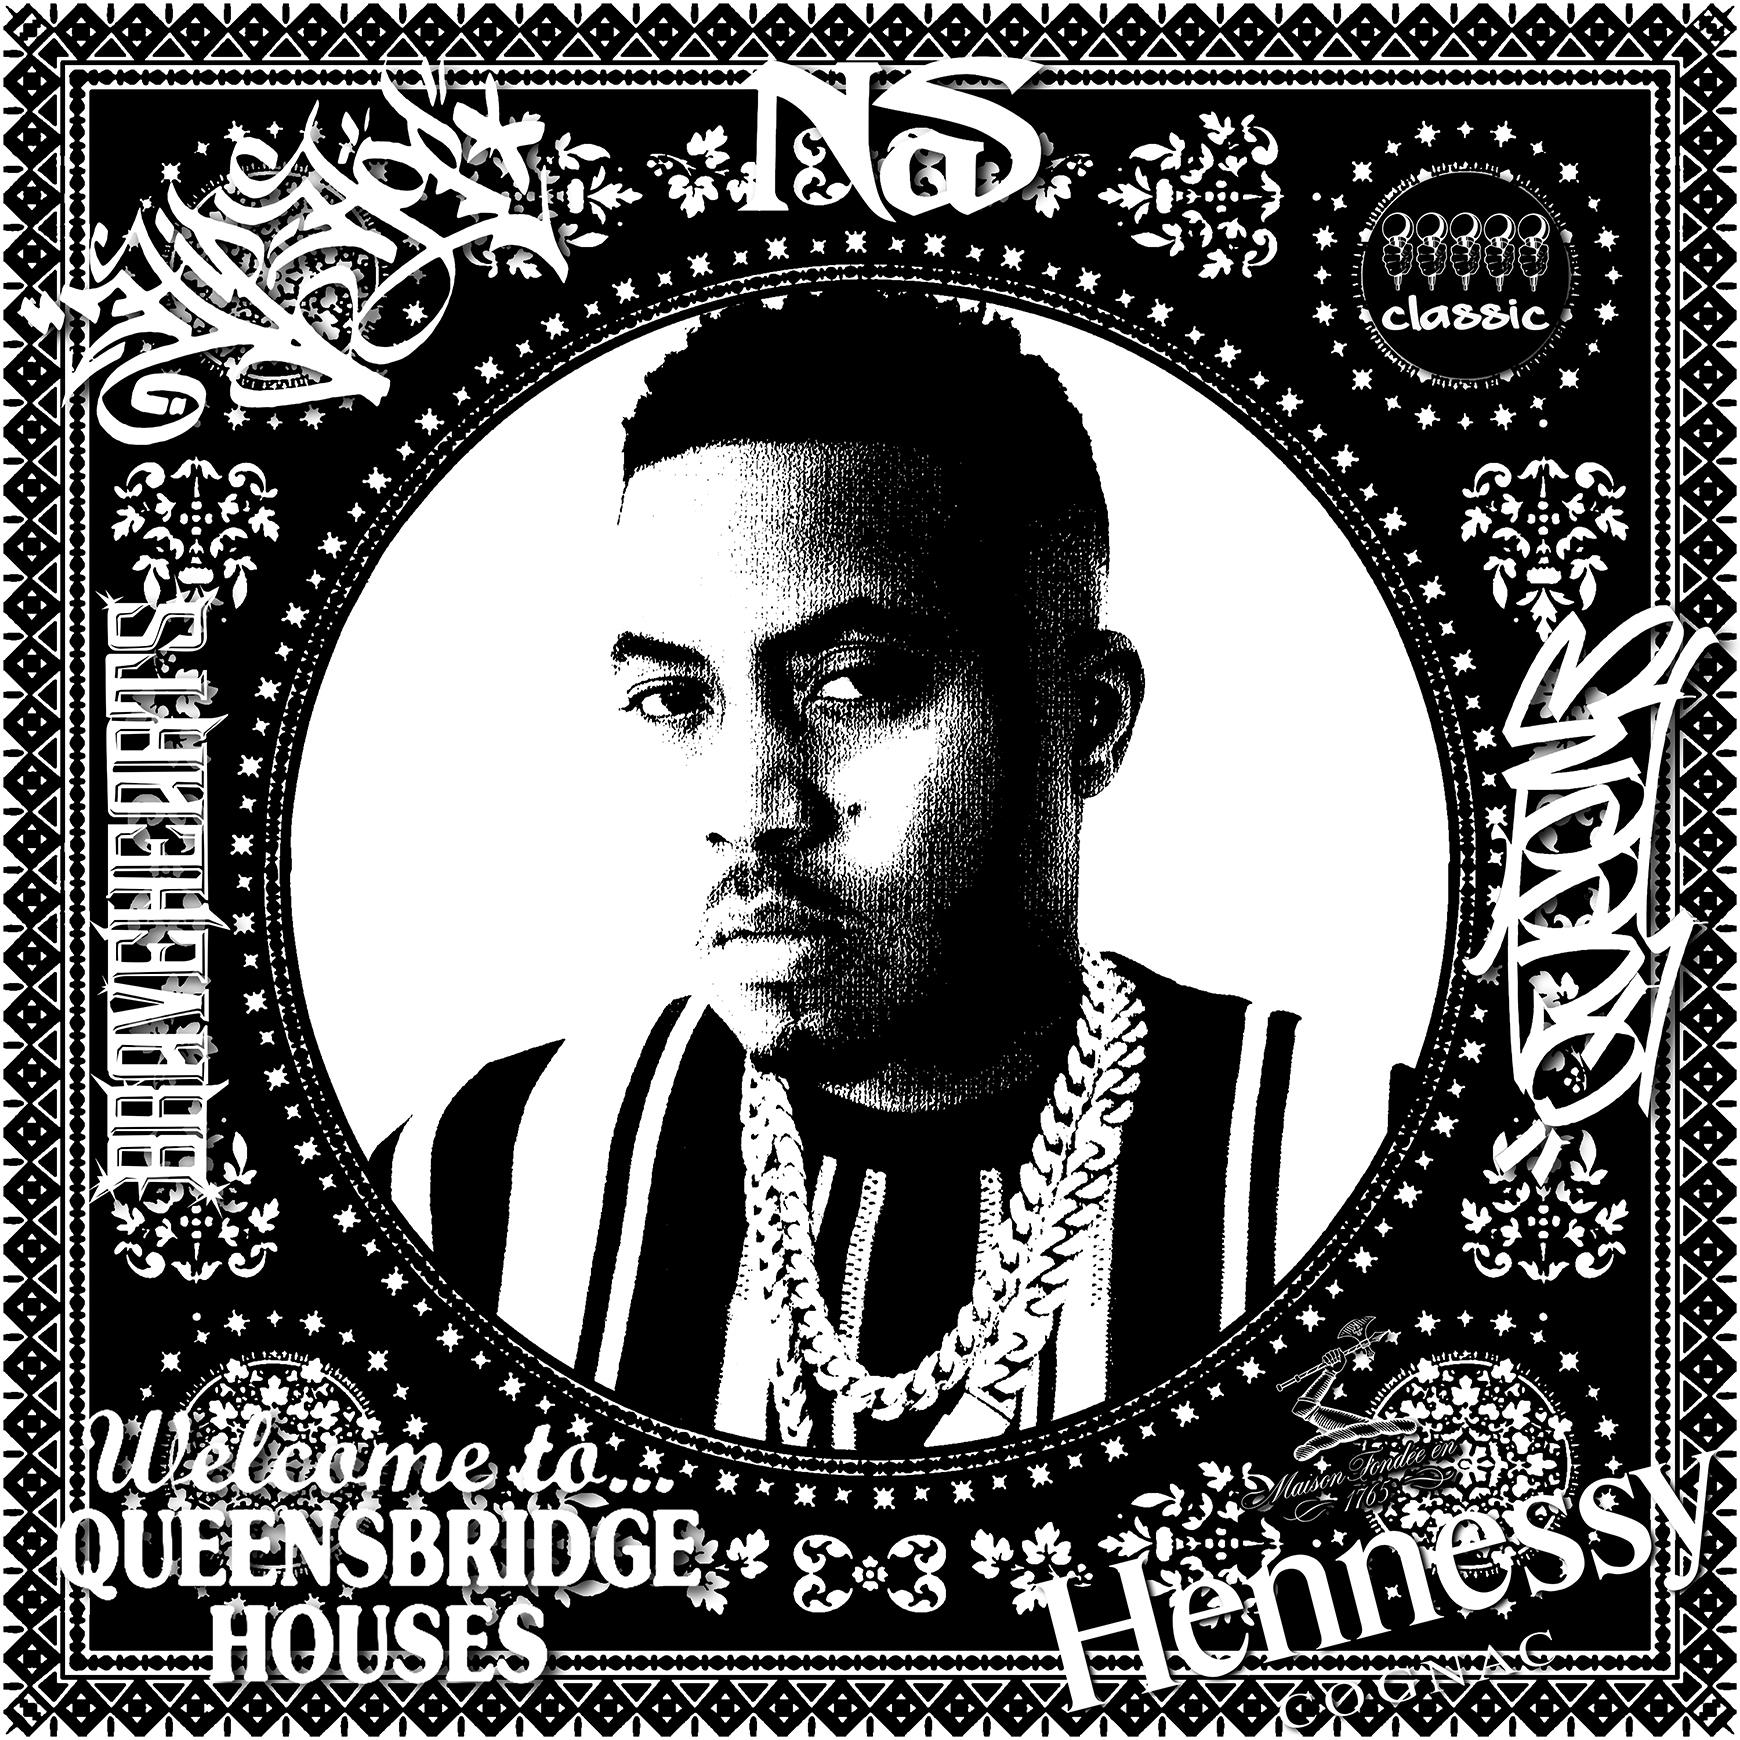 Nas (Black & White) (50 Years, Hip Hop, Rap, Iconic, Artist, Musician, Rapper) - Print by Agent X